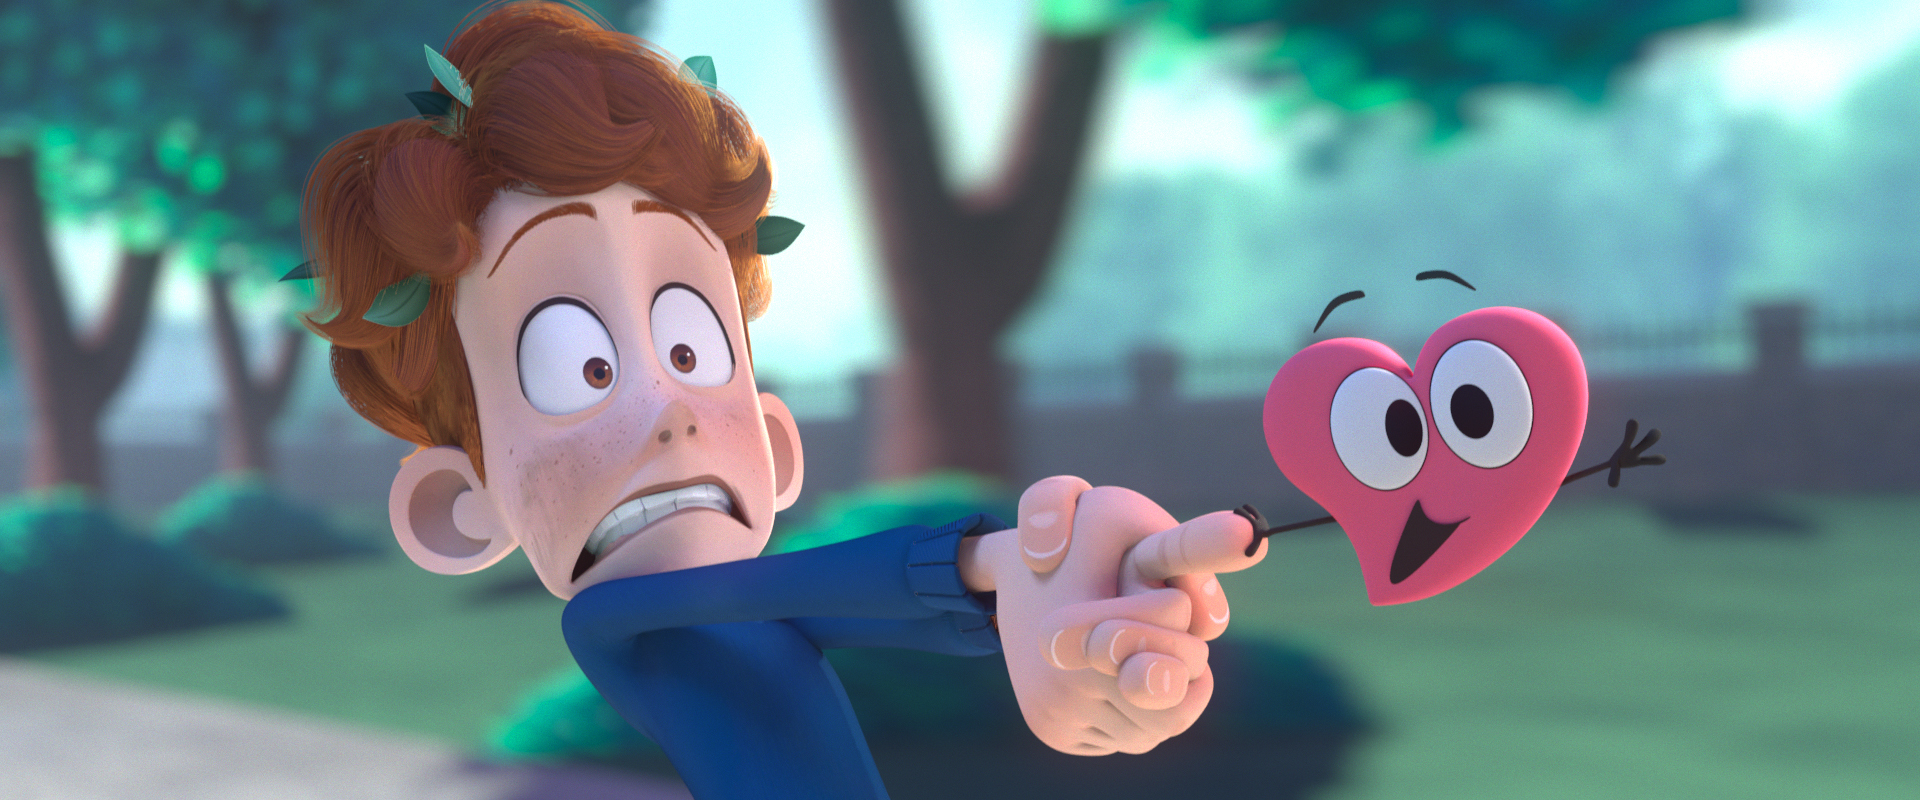 Esteban Bravo and Beth David submitted “In a Heartbeat” for the best animated short category at the Oscars. Courtesy image